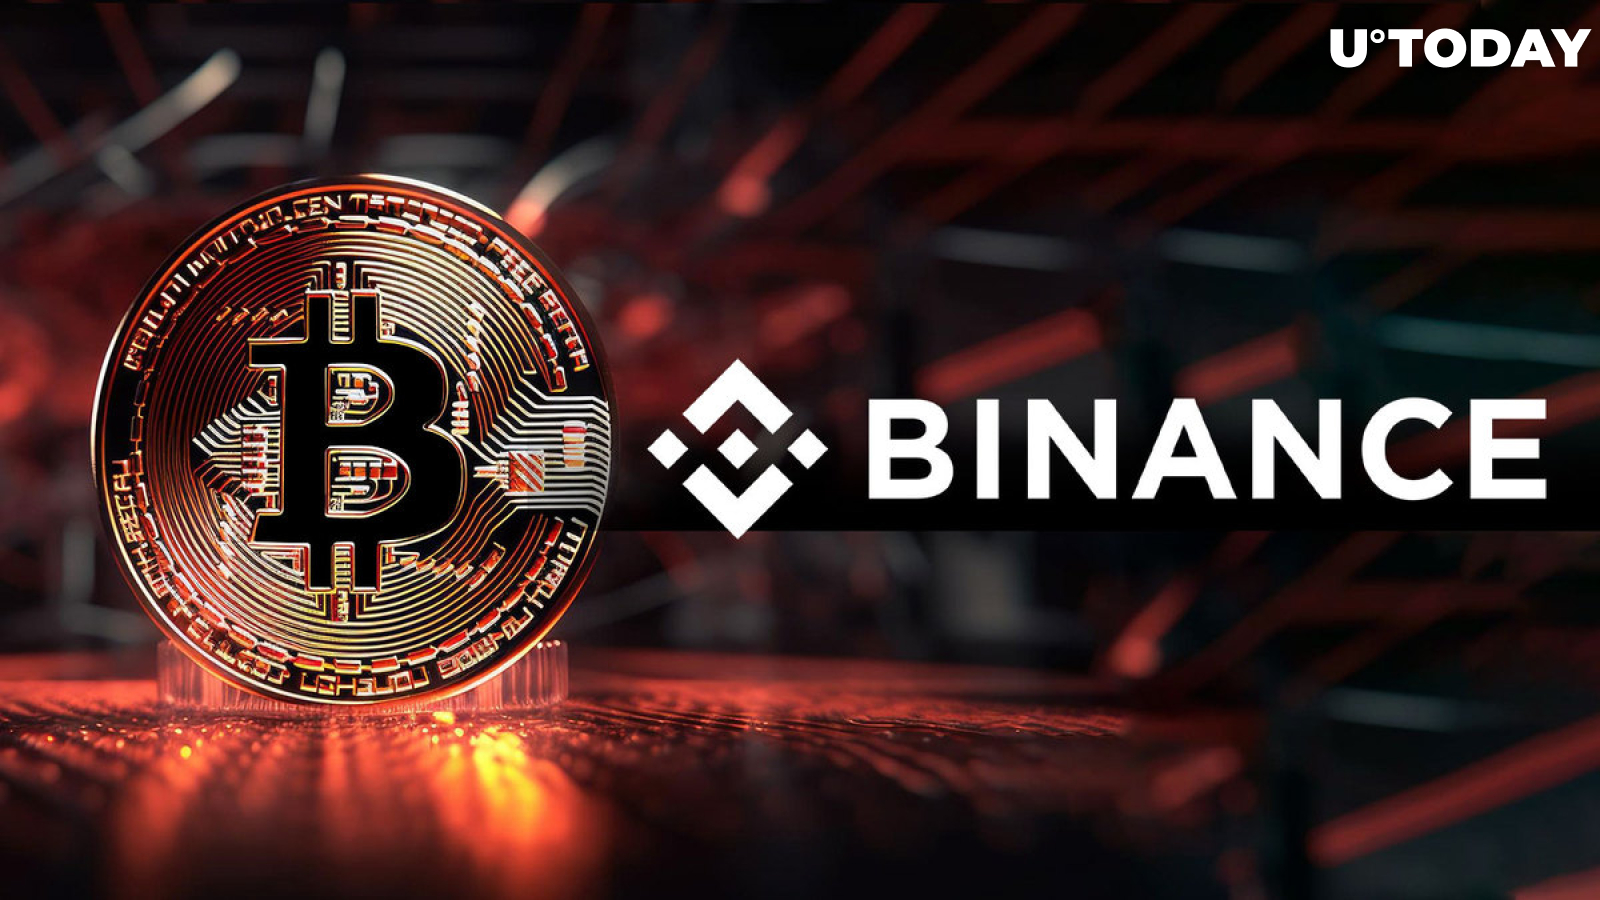 Bitcoin (BTC) Withdrawals to Be Temporarily Suspended on Binance, Here's Why